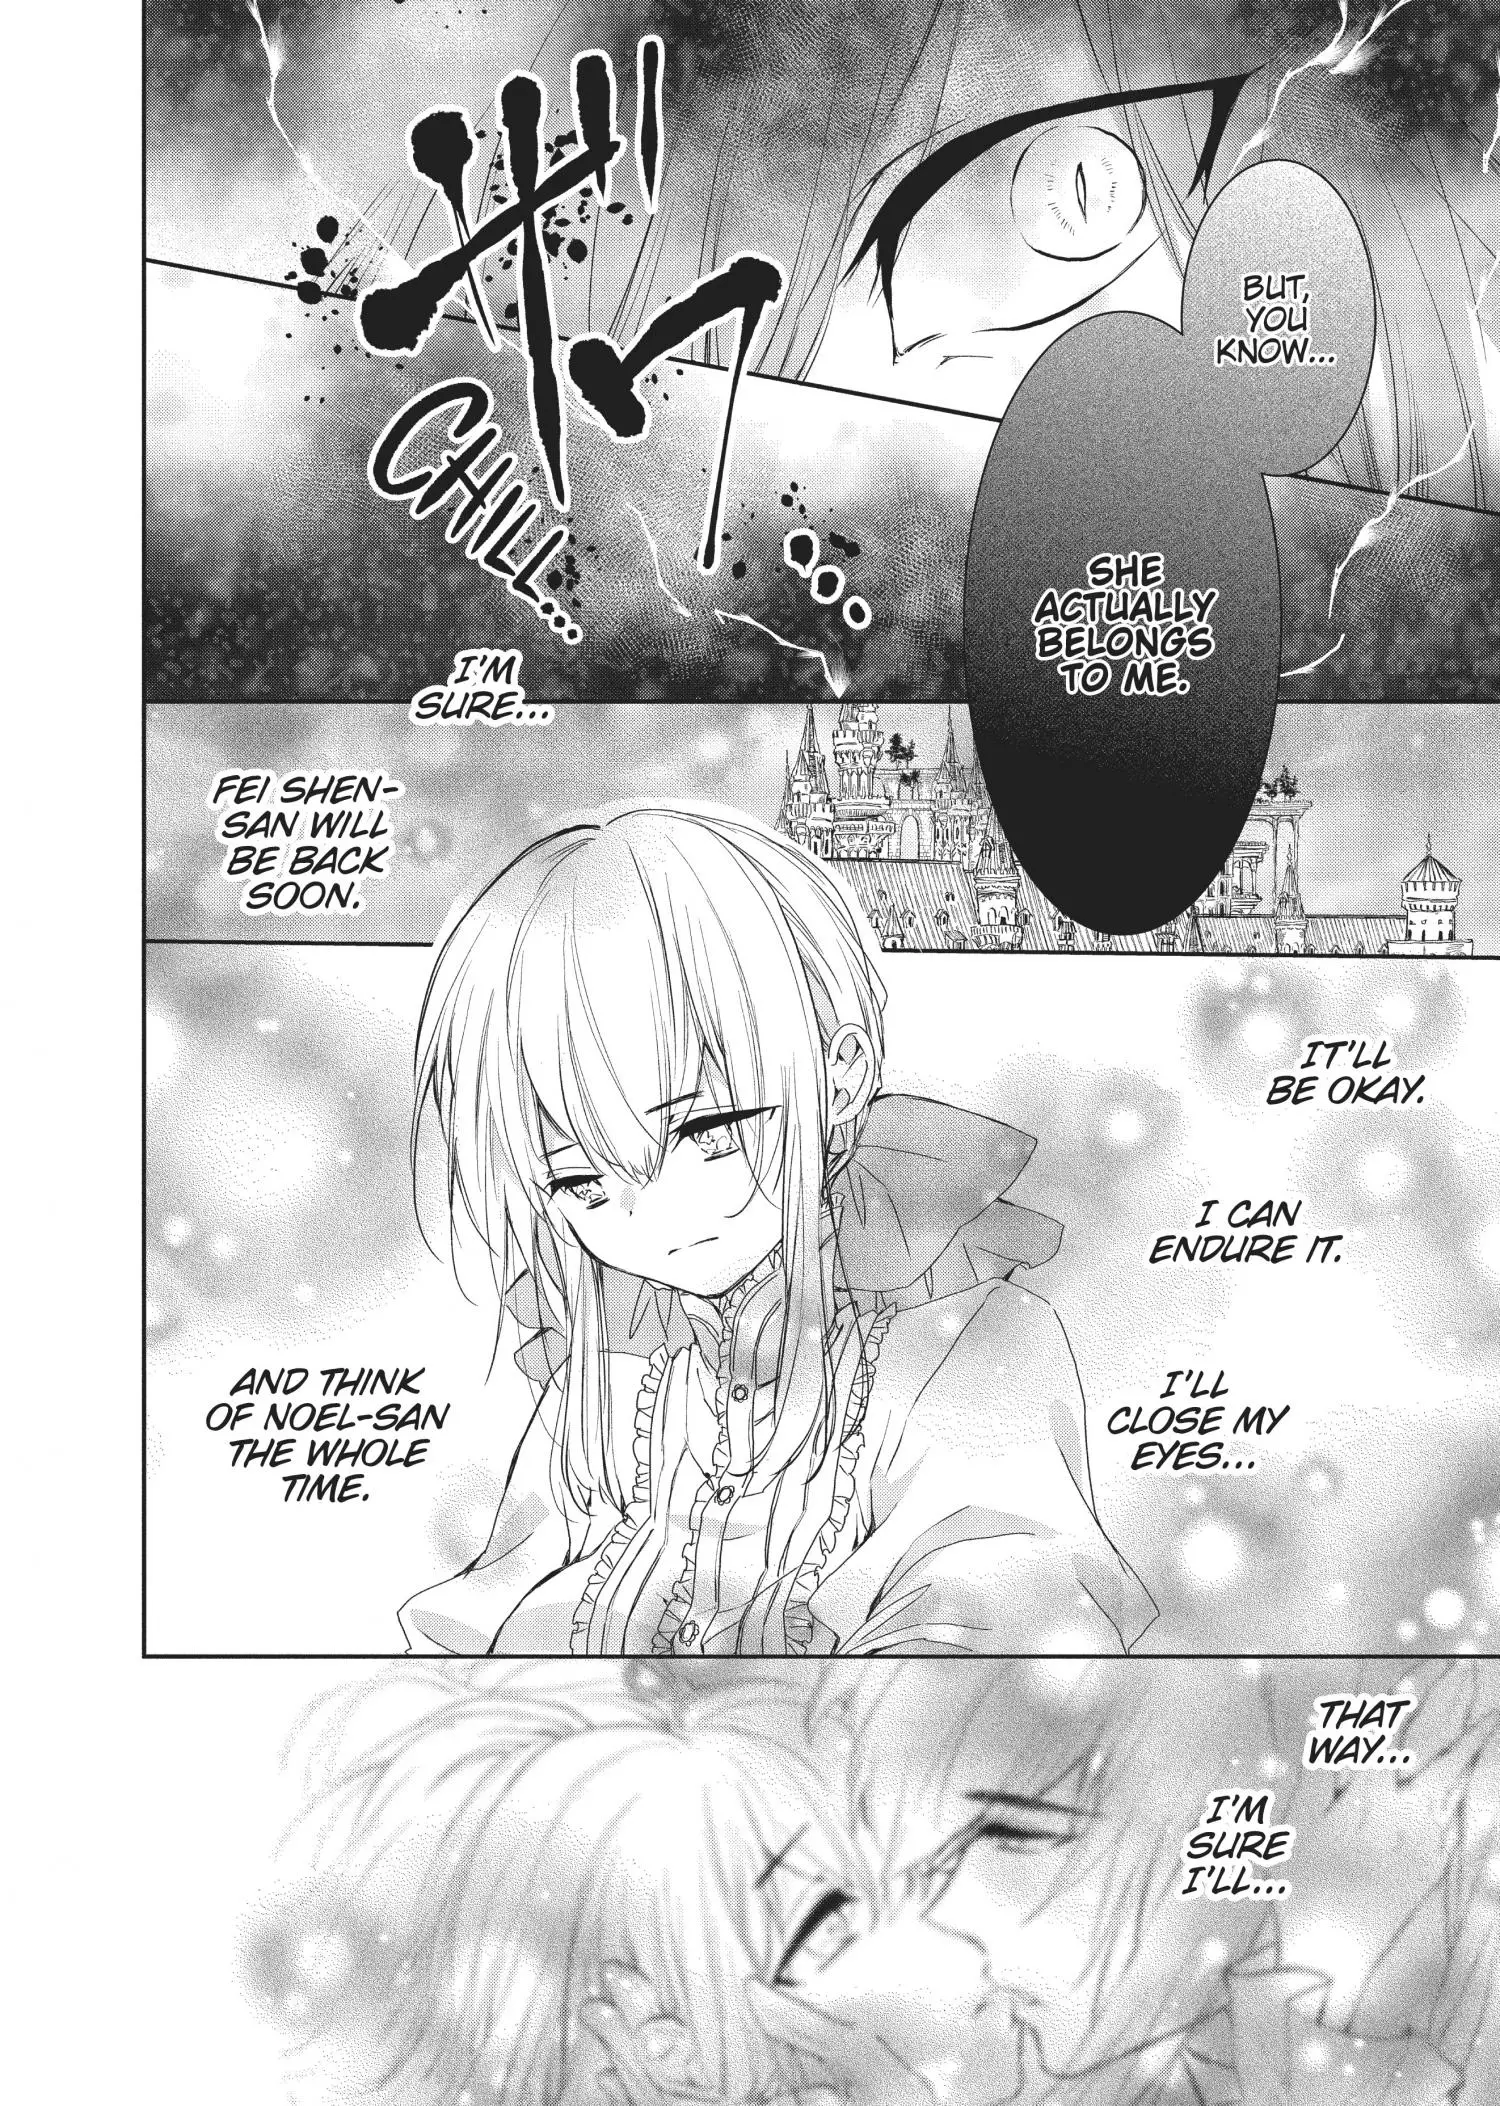 Outbride -Ikei Konin- - 15 page 23-6dbccd1f